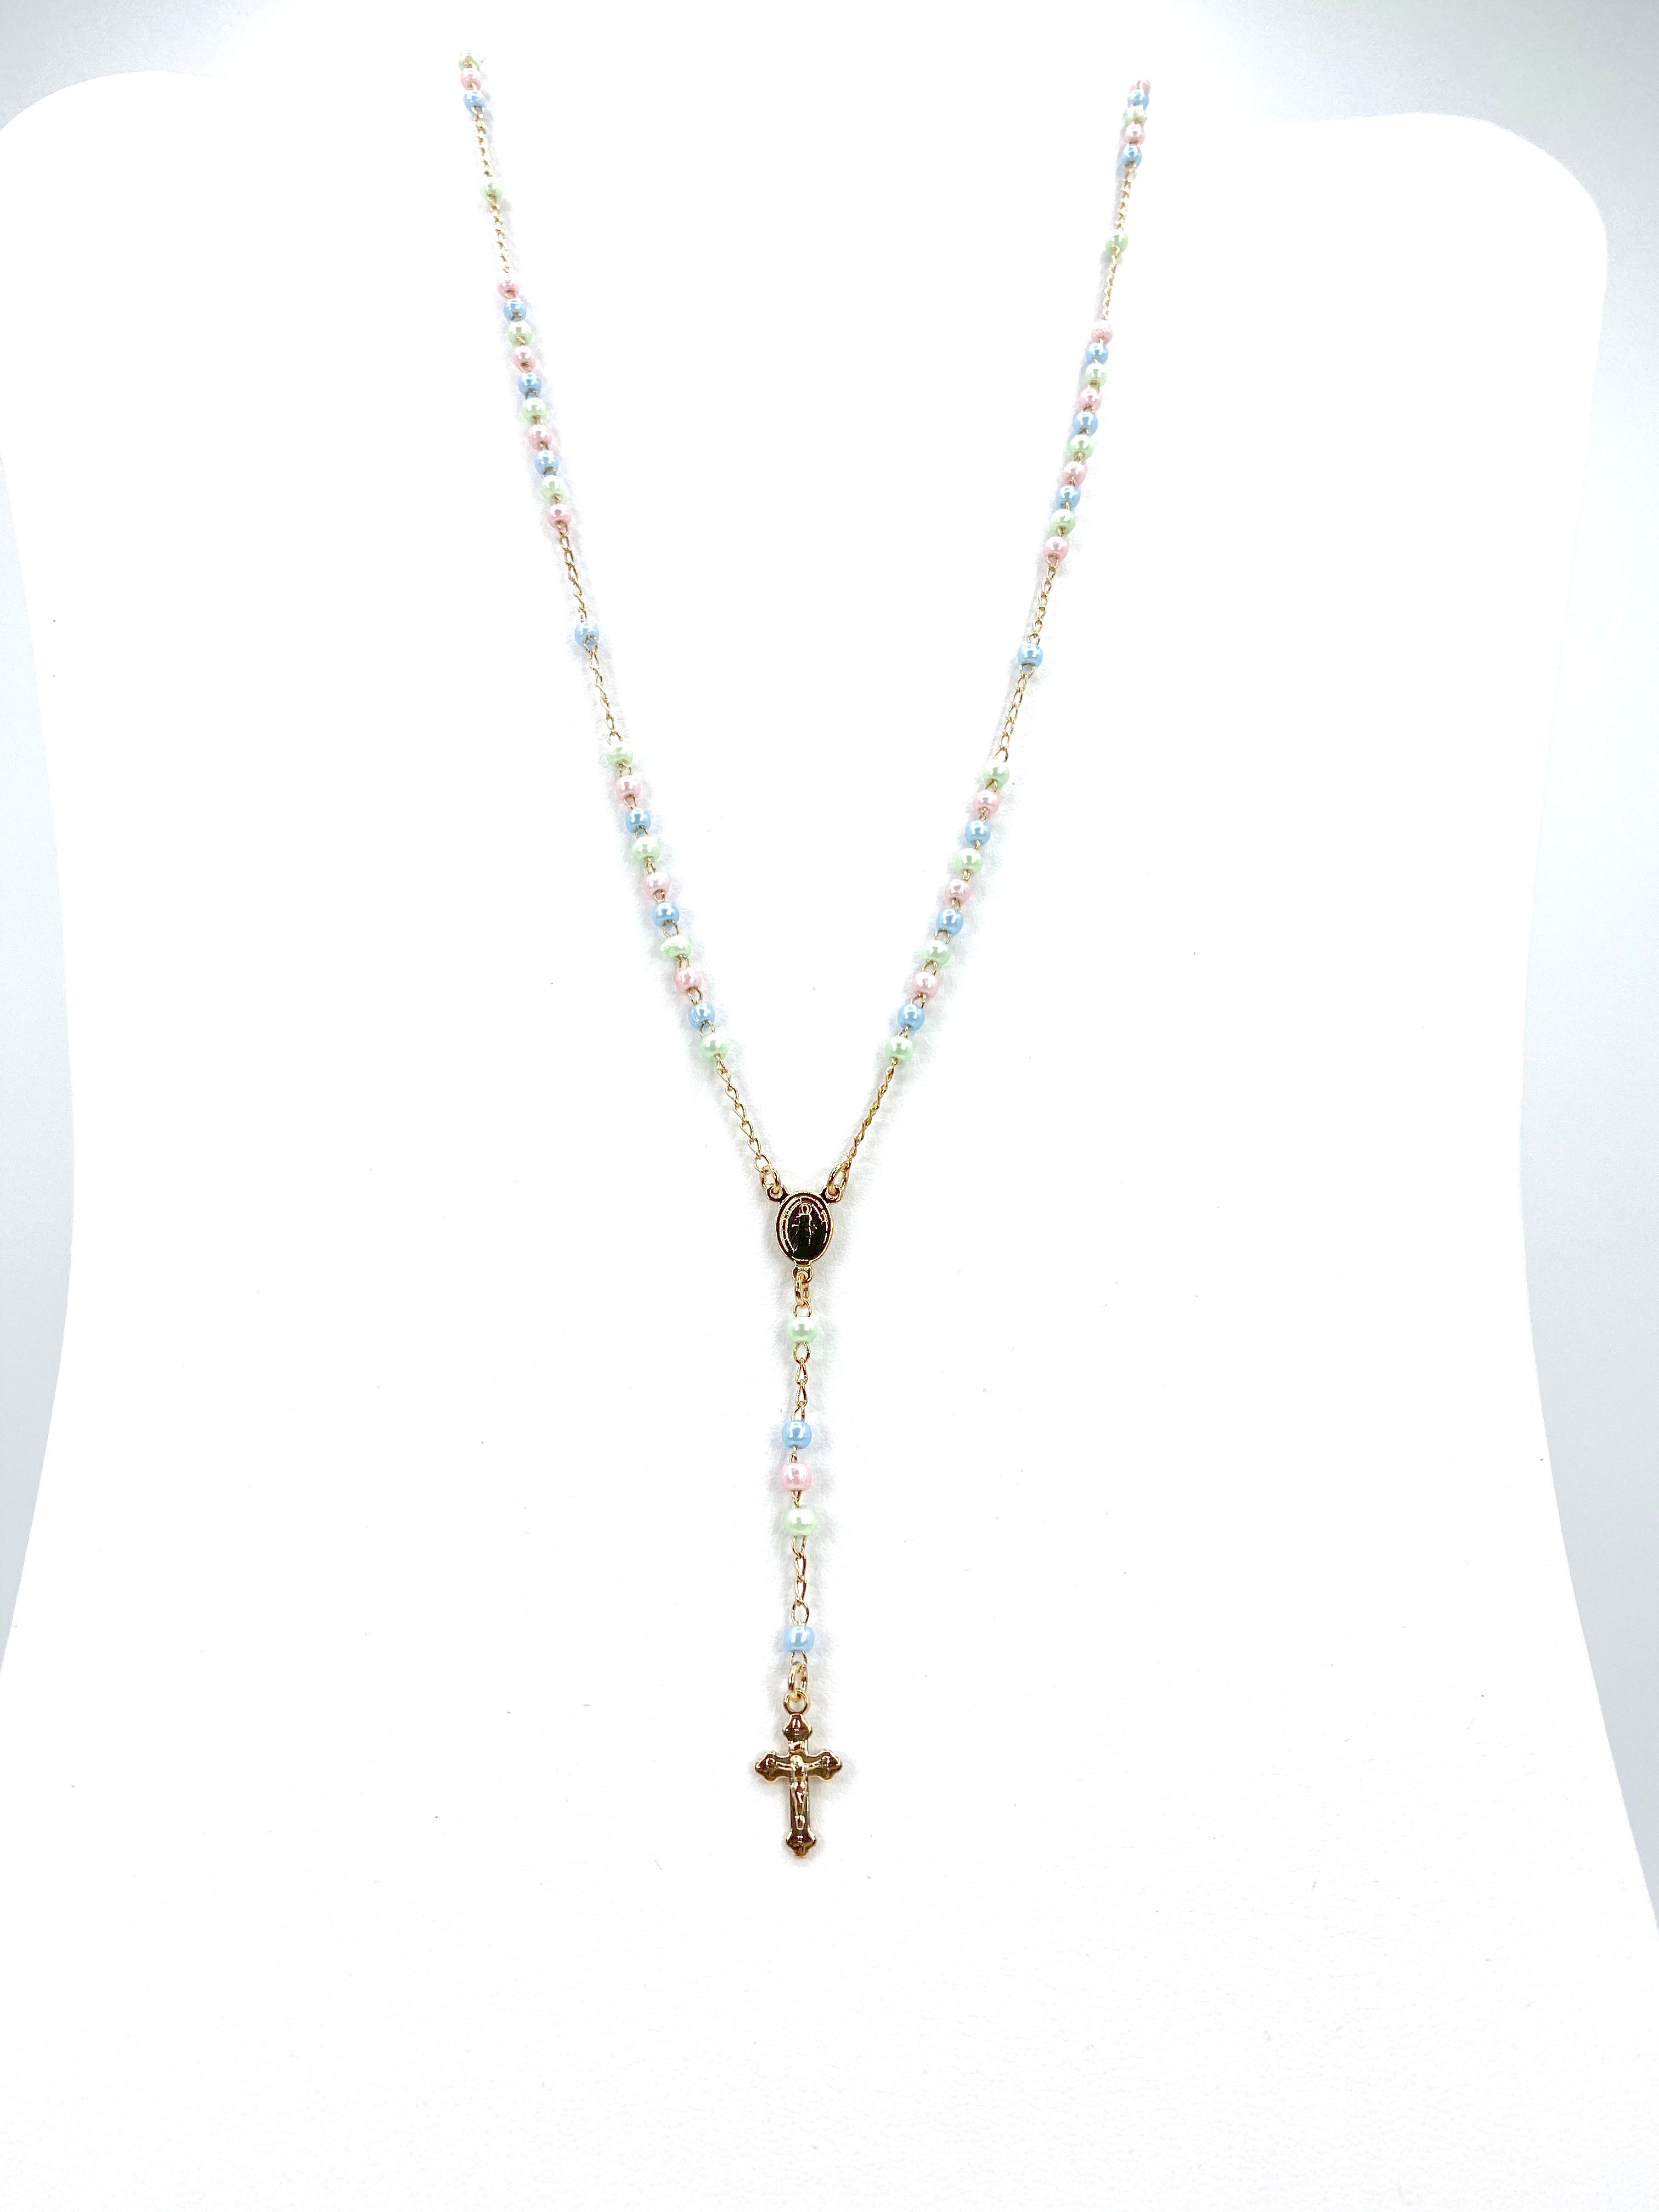 Pastel colored Rosary Necklace